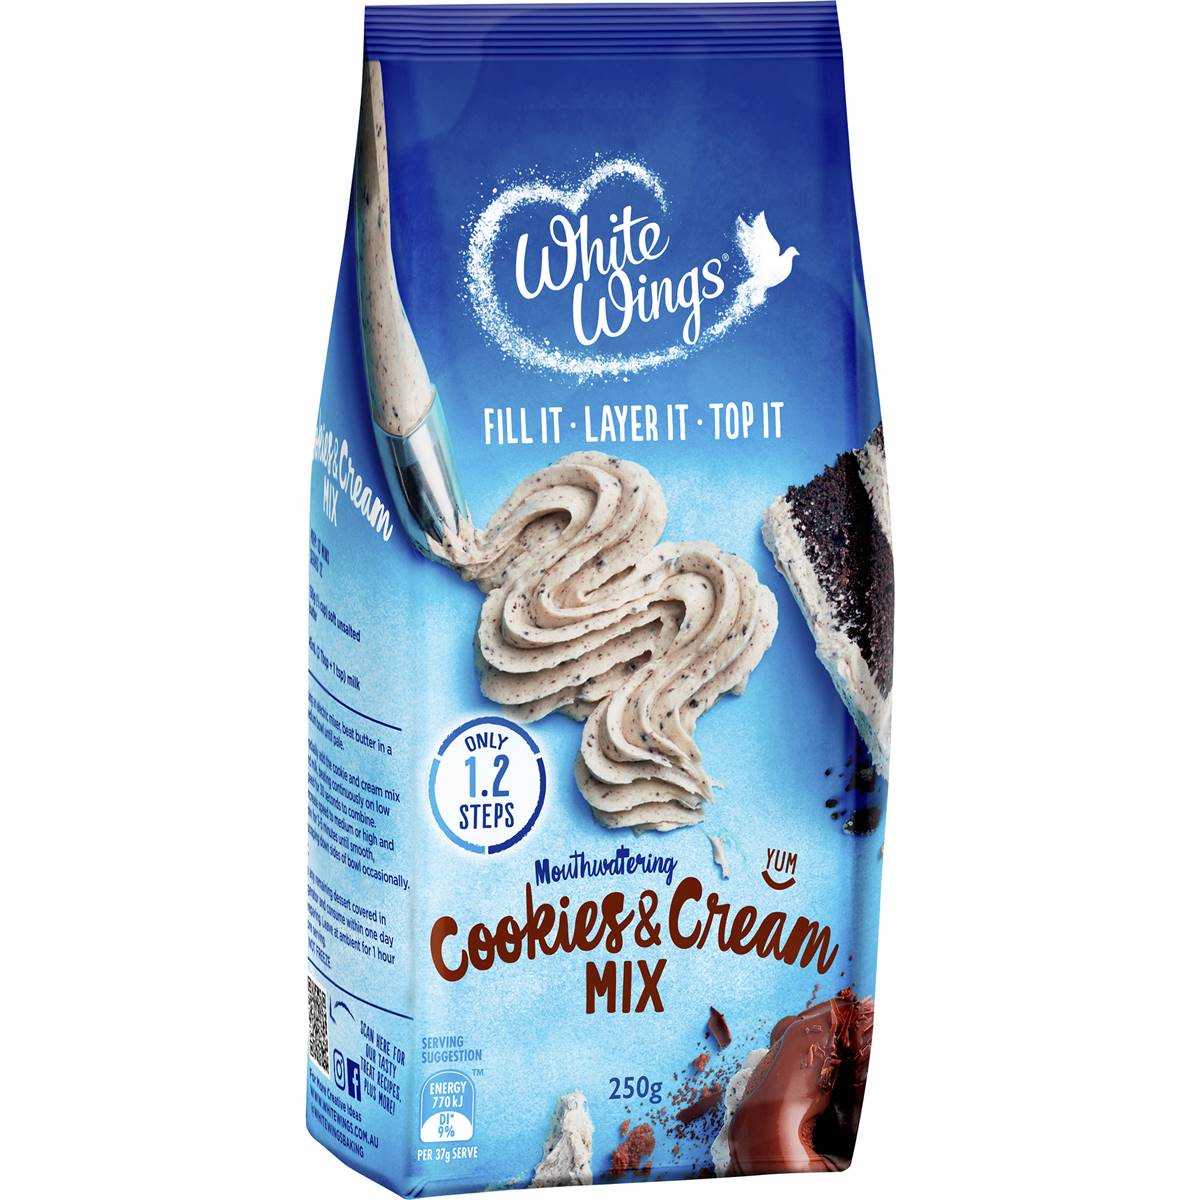 Calories in White Wings Cookies & Cream Mix